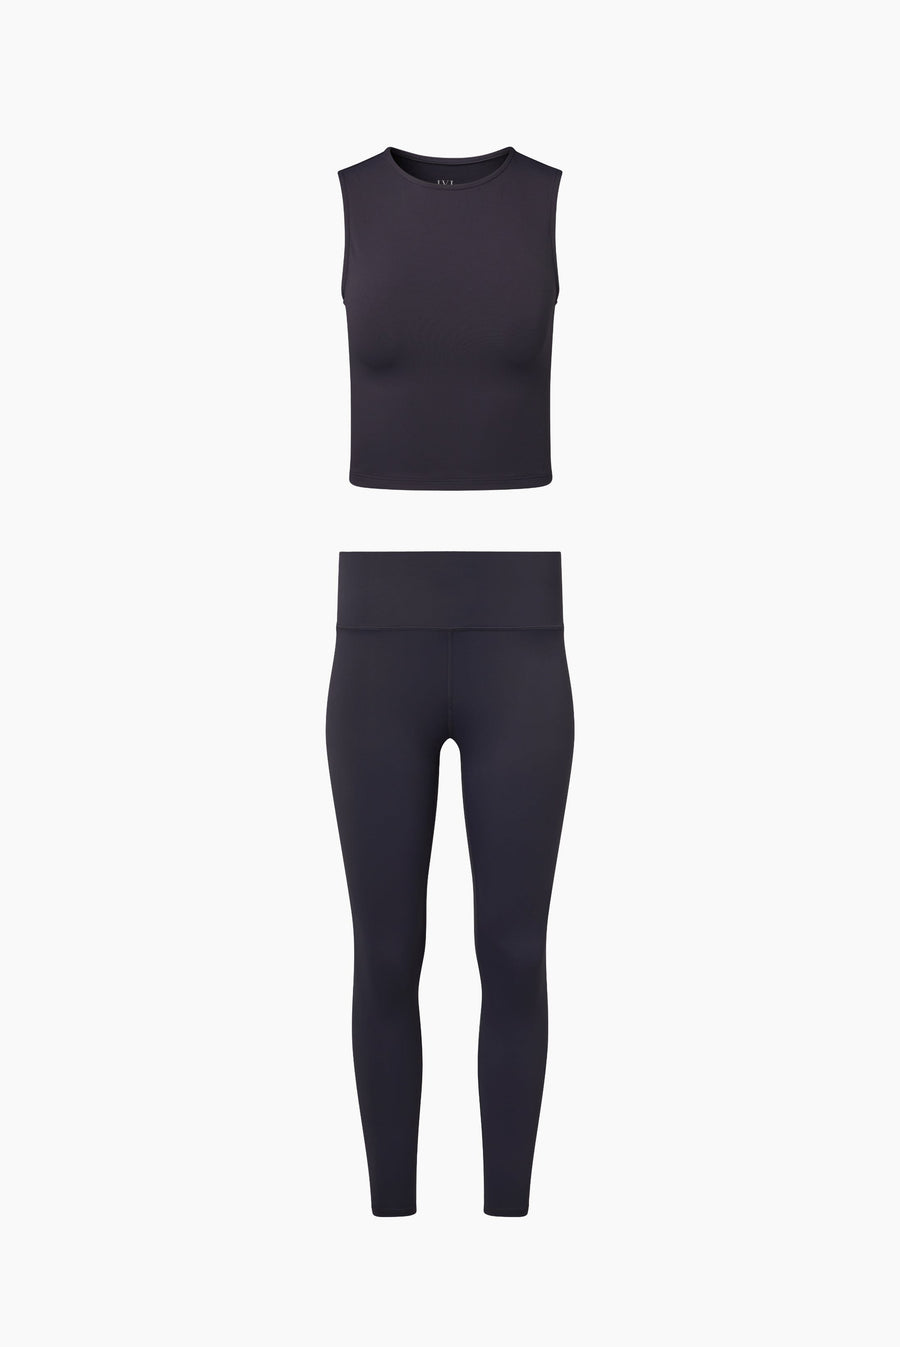 Odyssey Gray Base Tank + Active Legging IVL Collective 2 2 